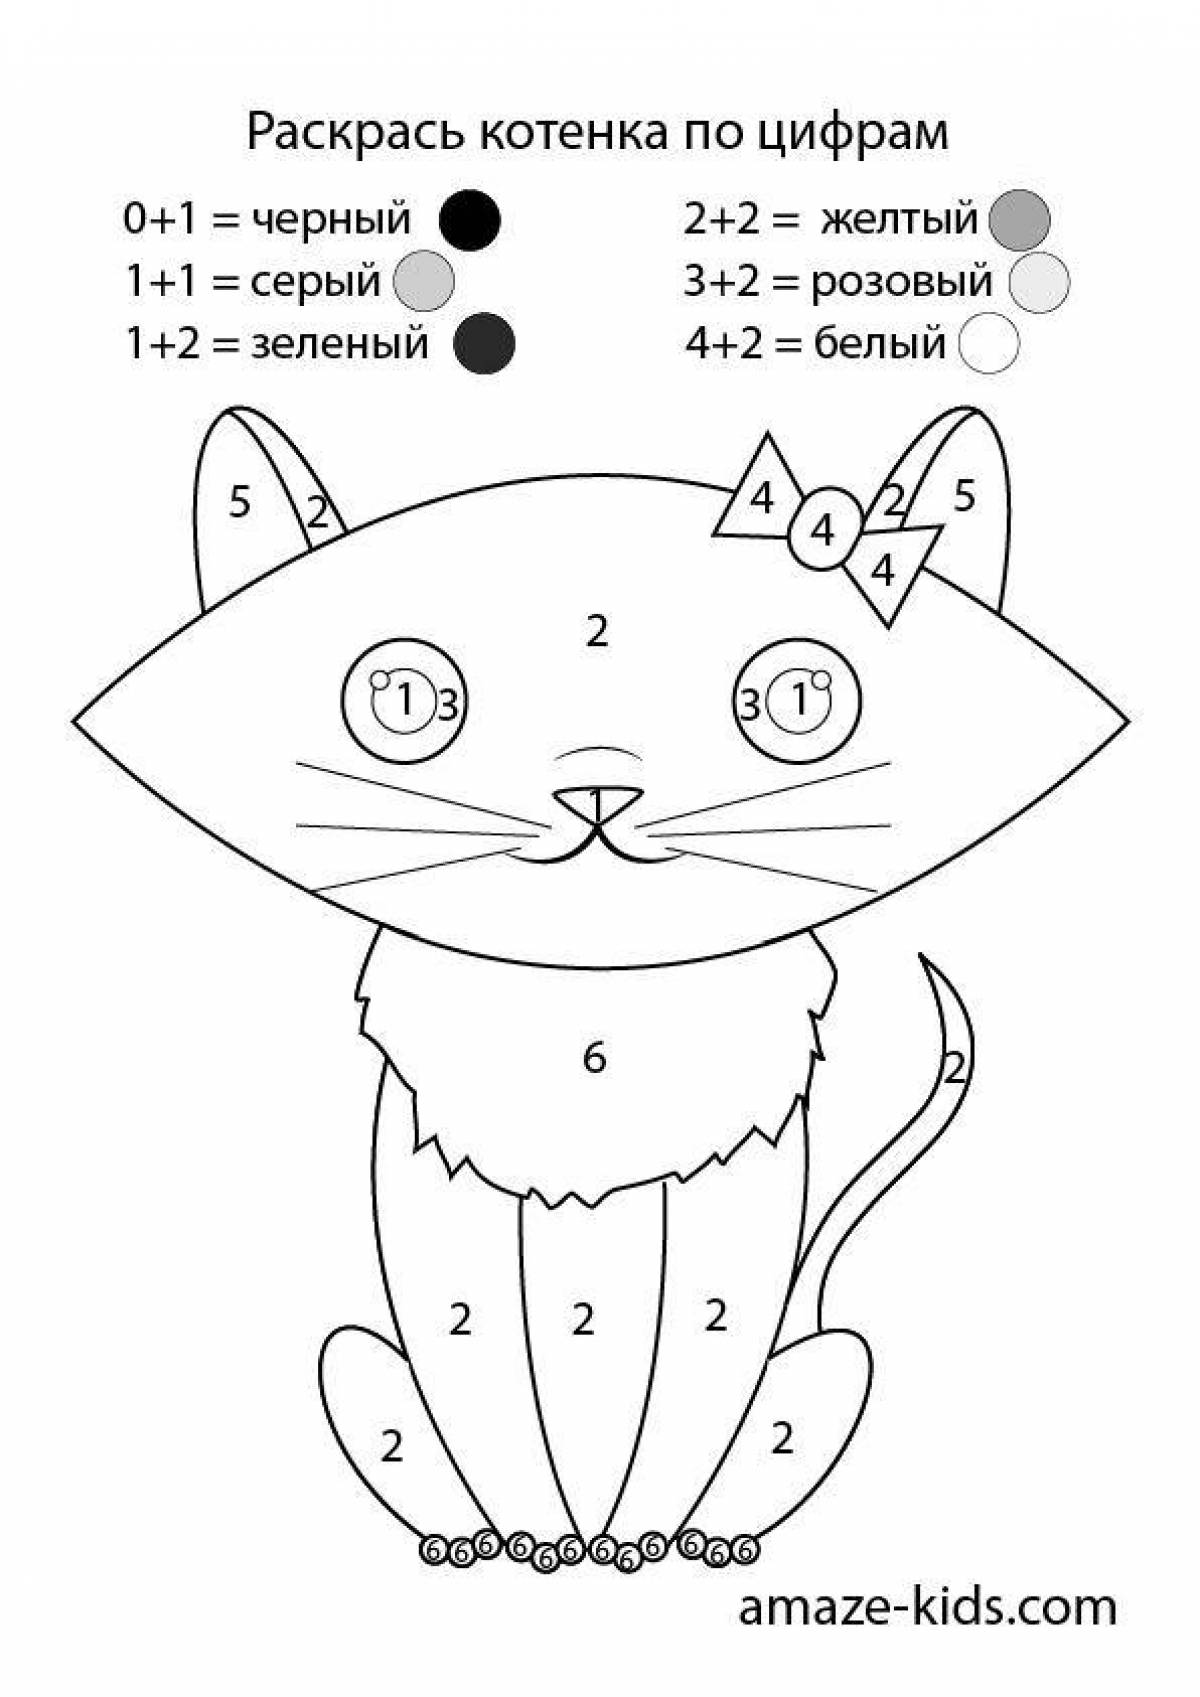 Effective cat coloring by numbers